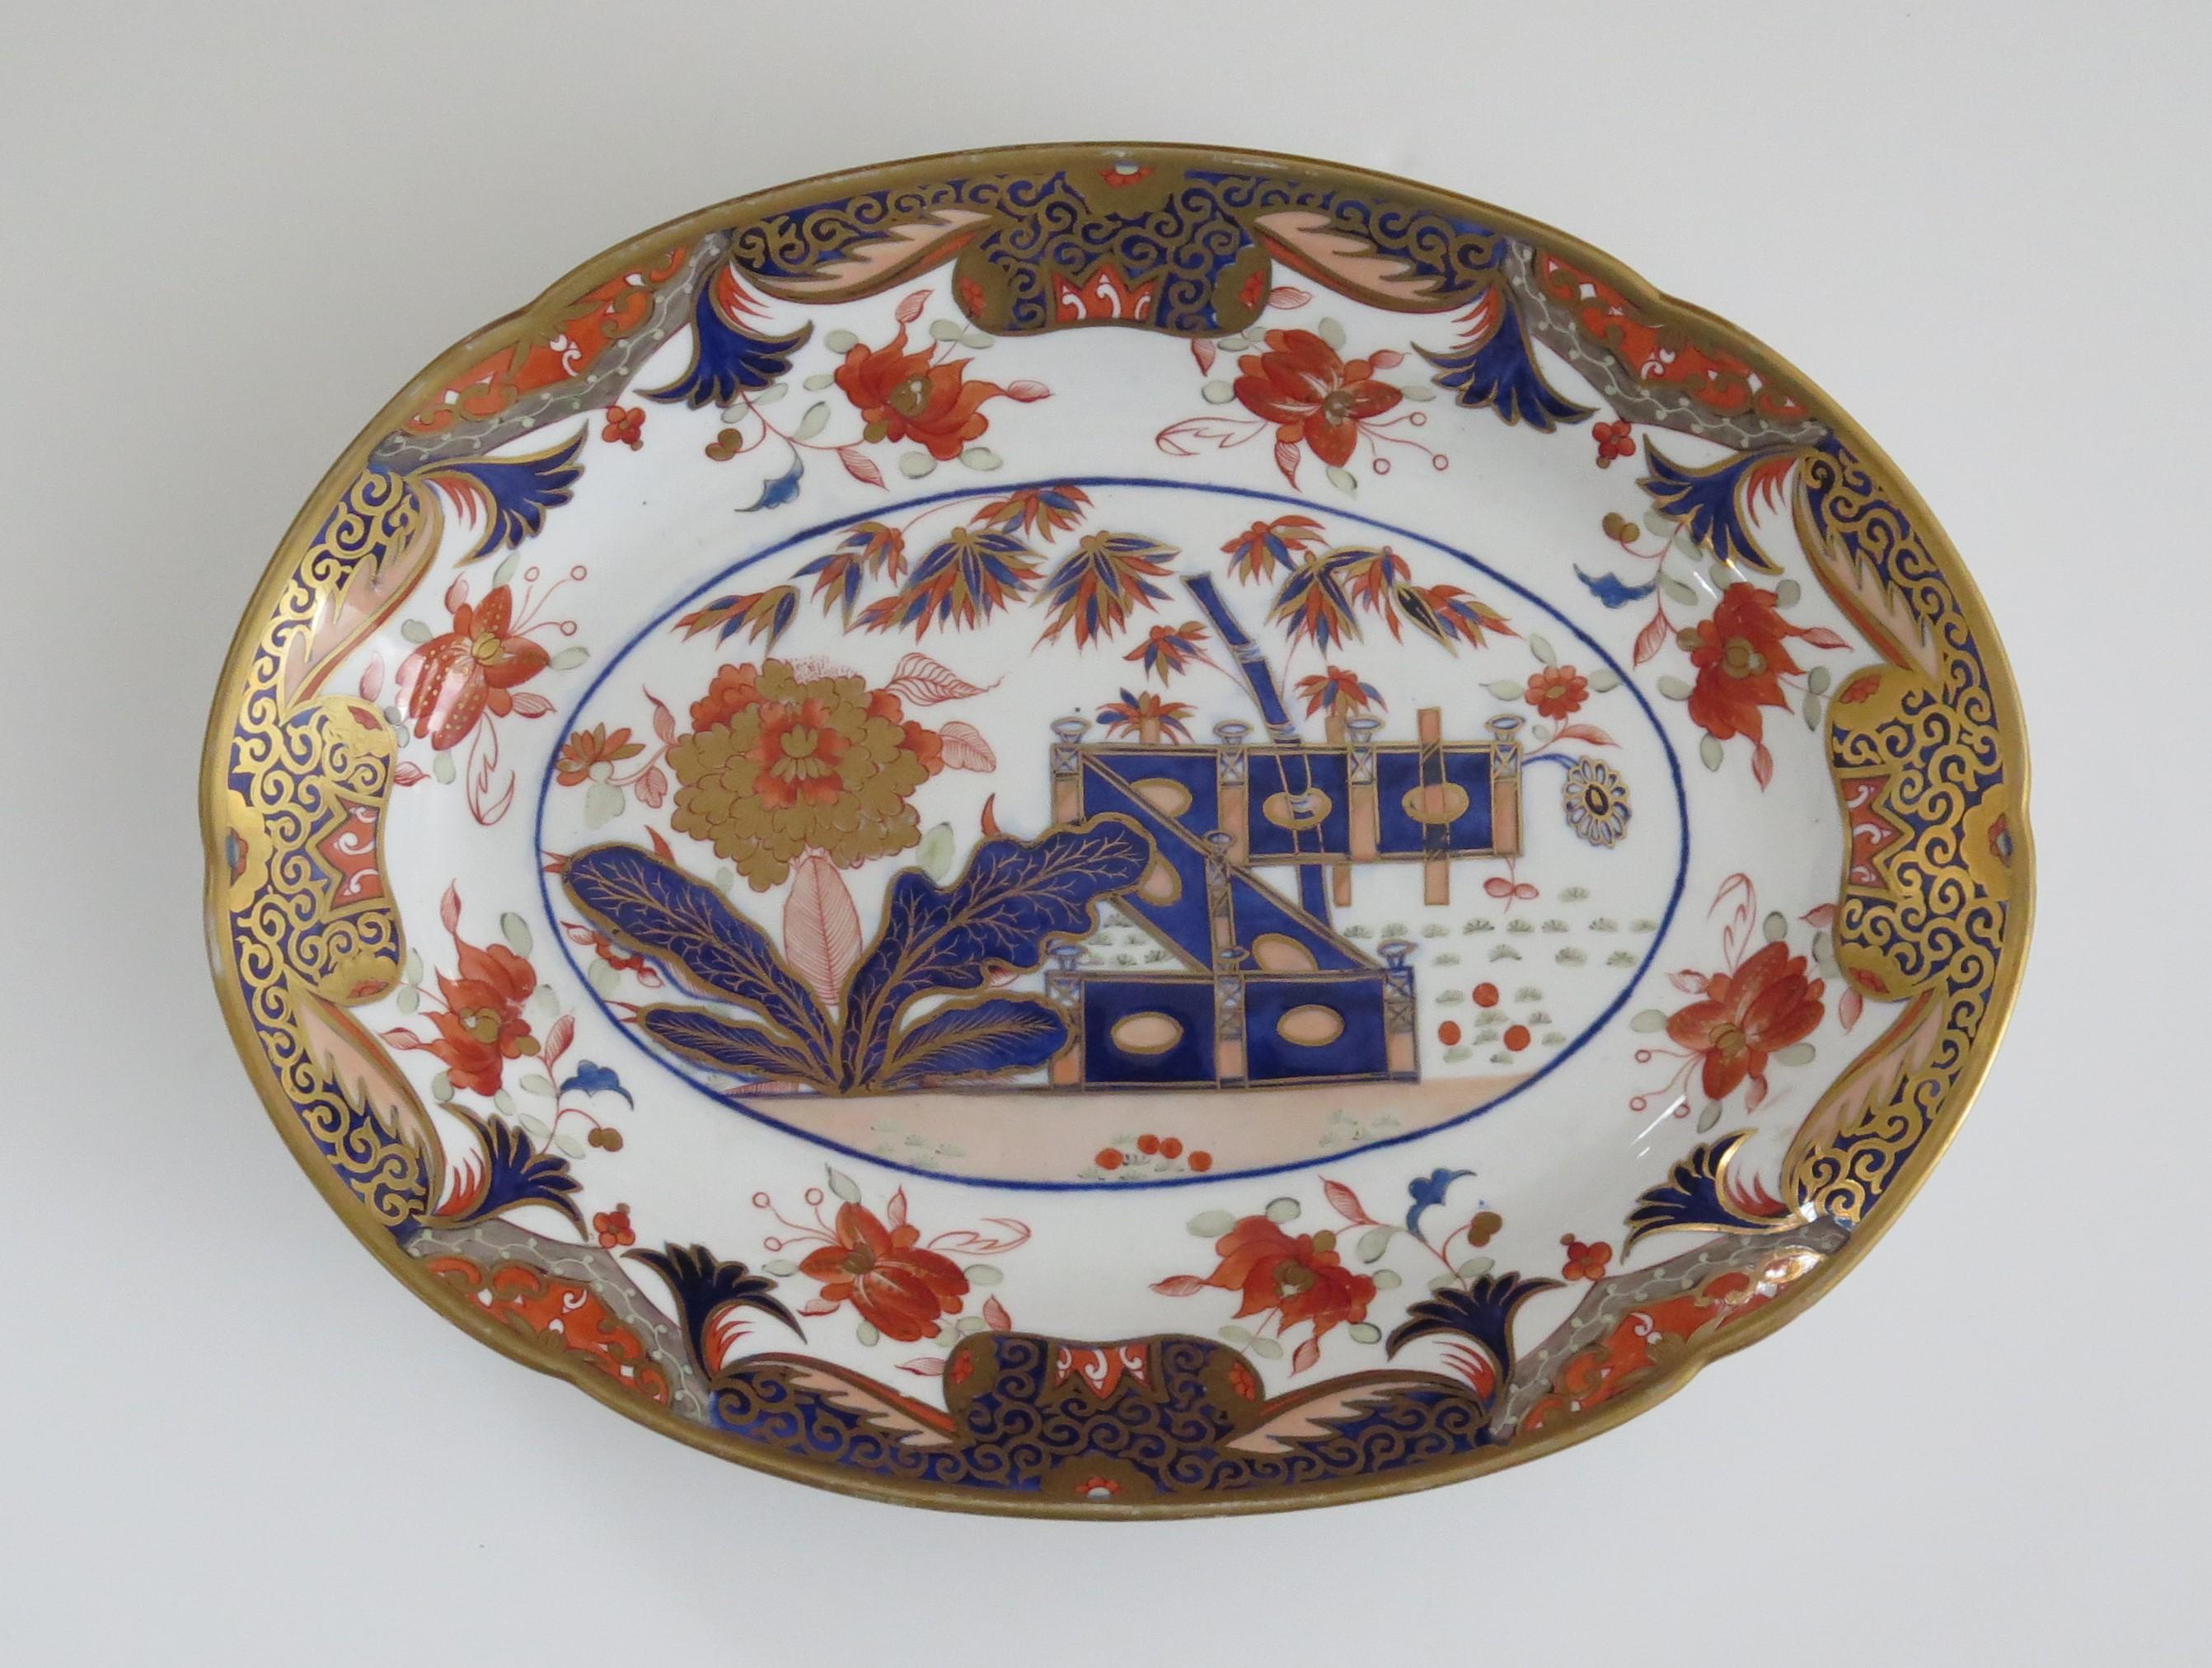 Spode Porcelain Serving Platter or Dish Hand Painted & Gilded Ptn 967 circa 1810 In Good Condition For Sale In Lincoln, Lincolnshire